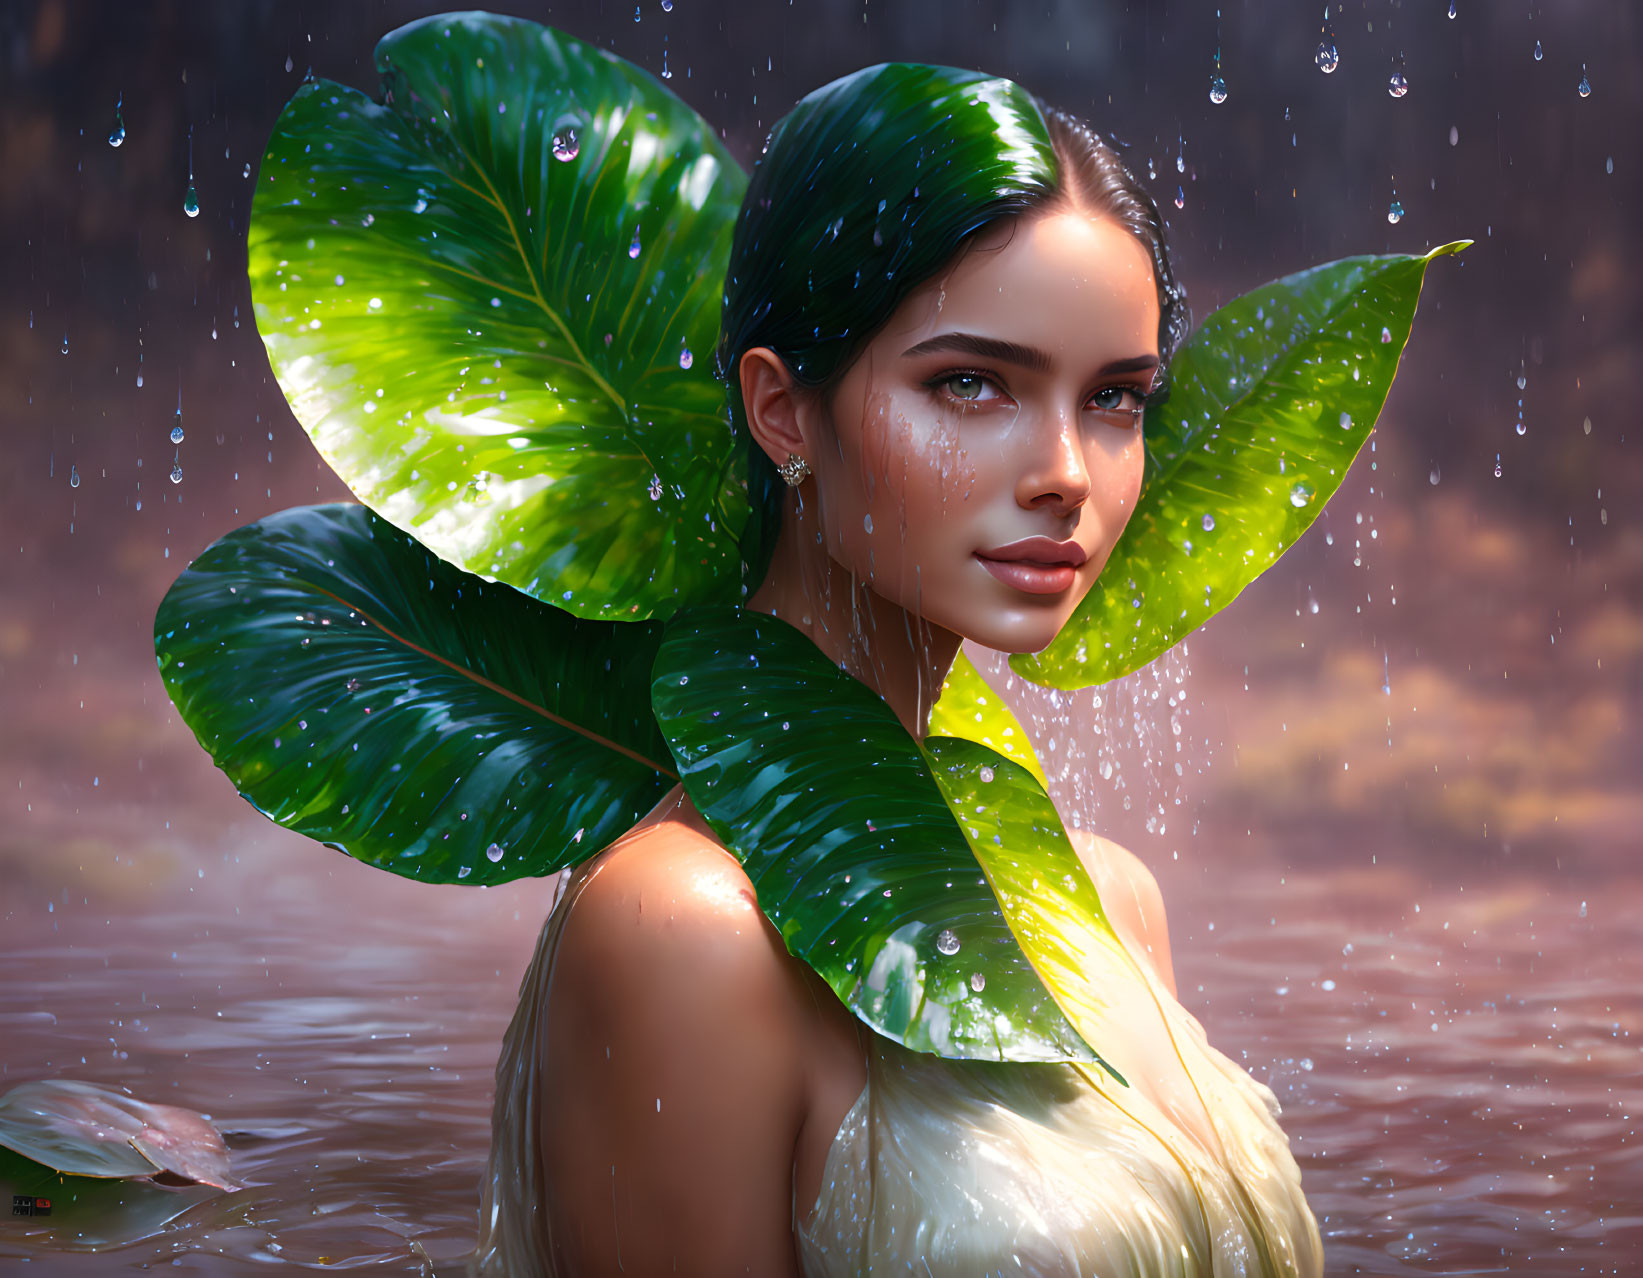 Woman with Wet Hair and Sleek Makeup Surrounded by Raindrop-Covered Leaves